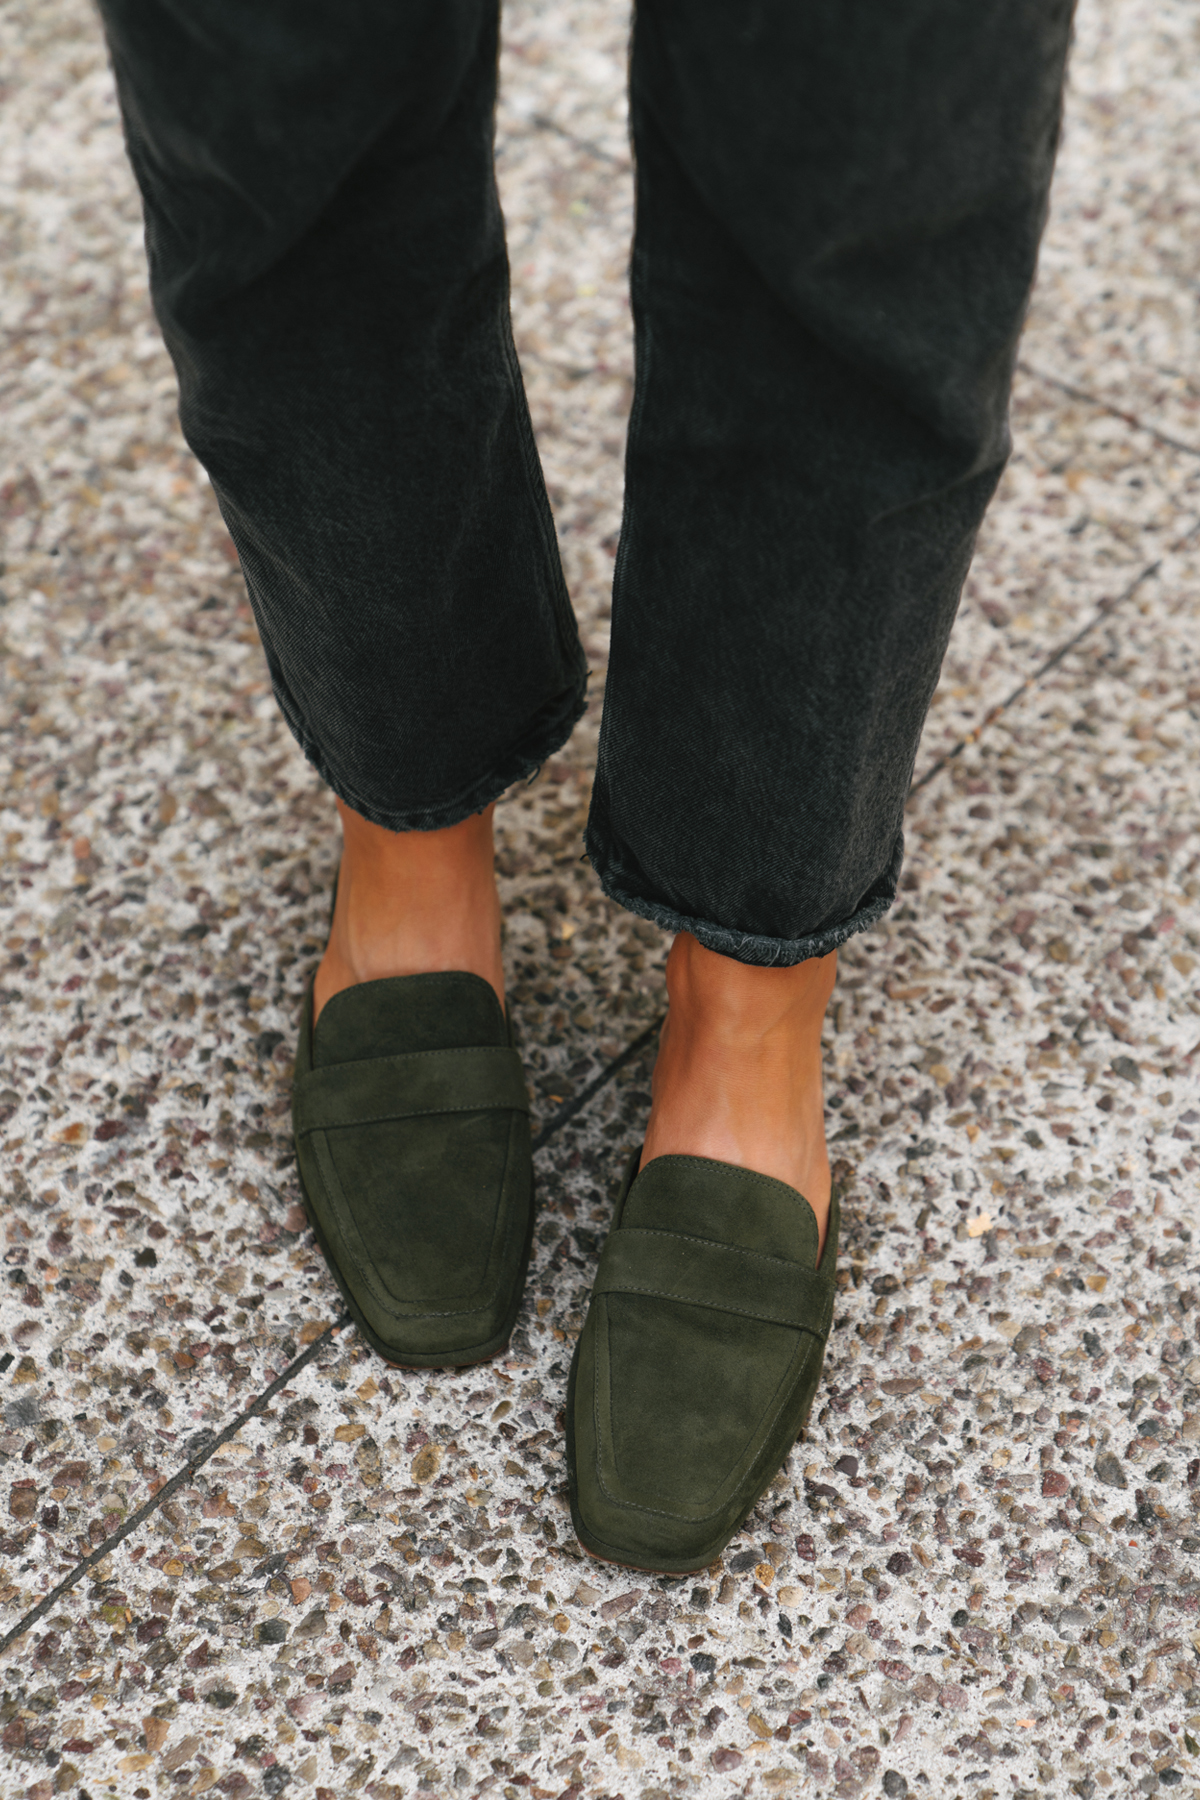 Fashion Jackson Wearing Vince Camuto Olive Green Suede Loafers